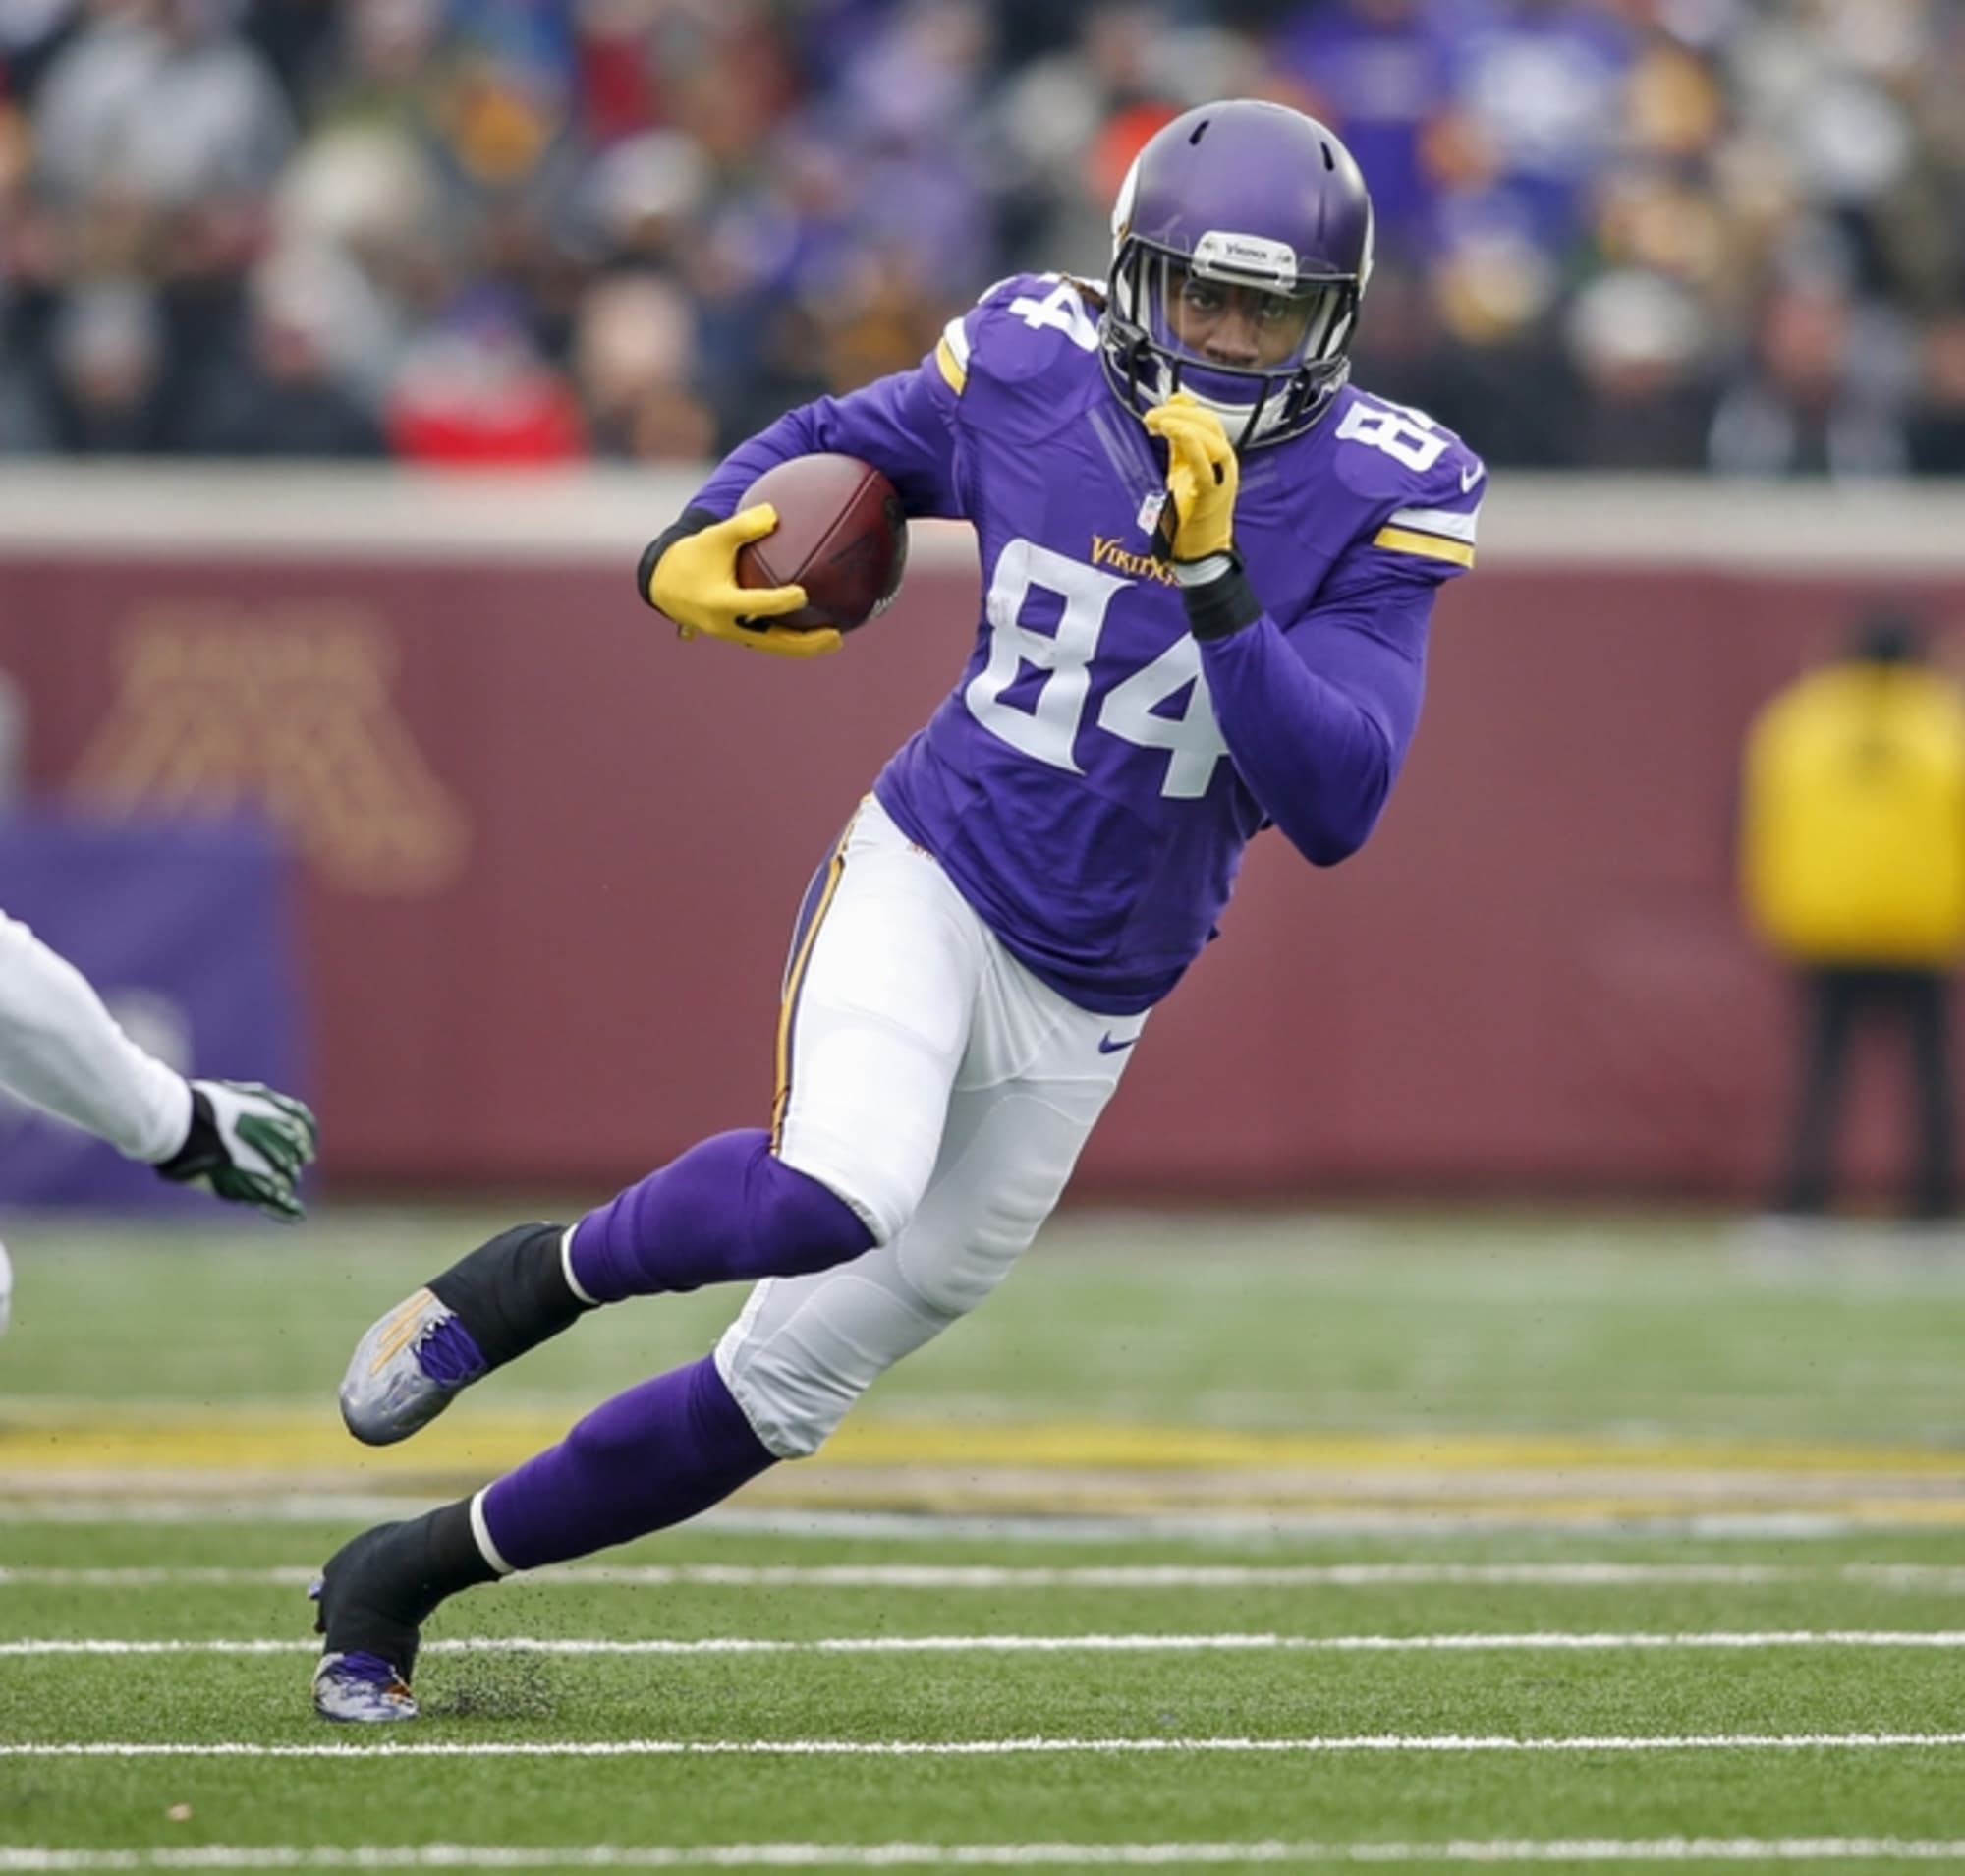 Does Cordarrelle Patterson Have What it Takes?